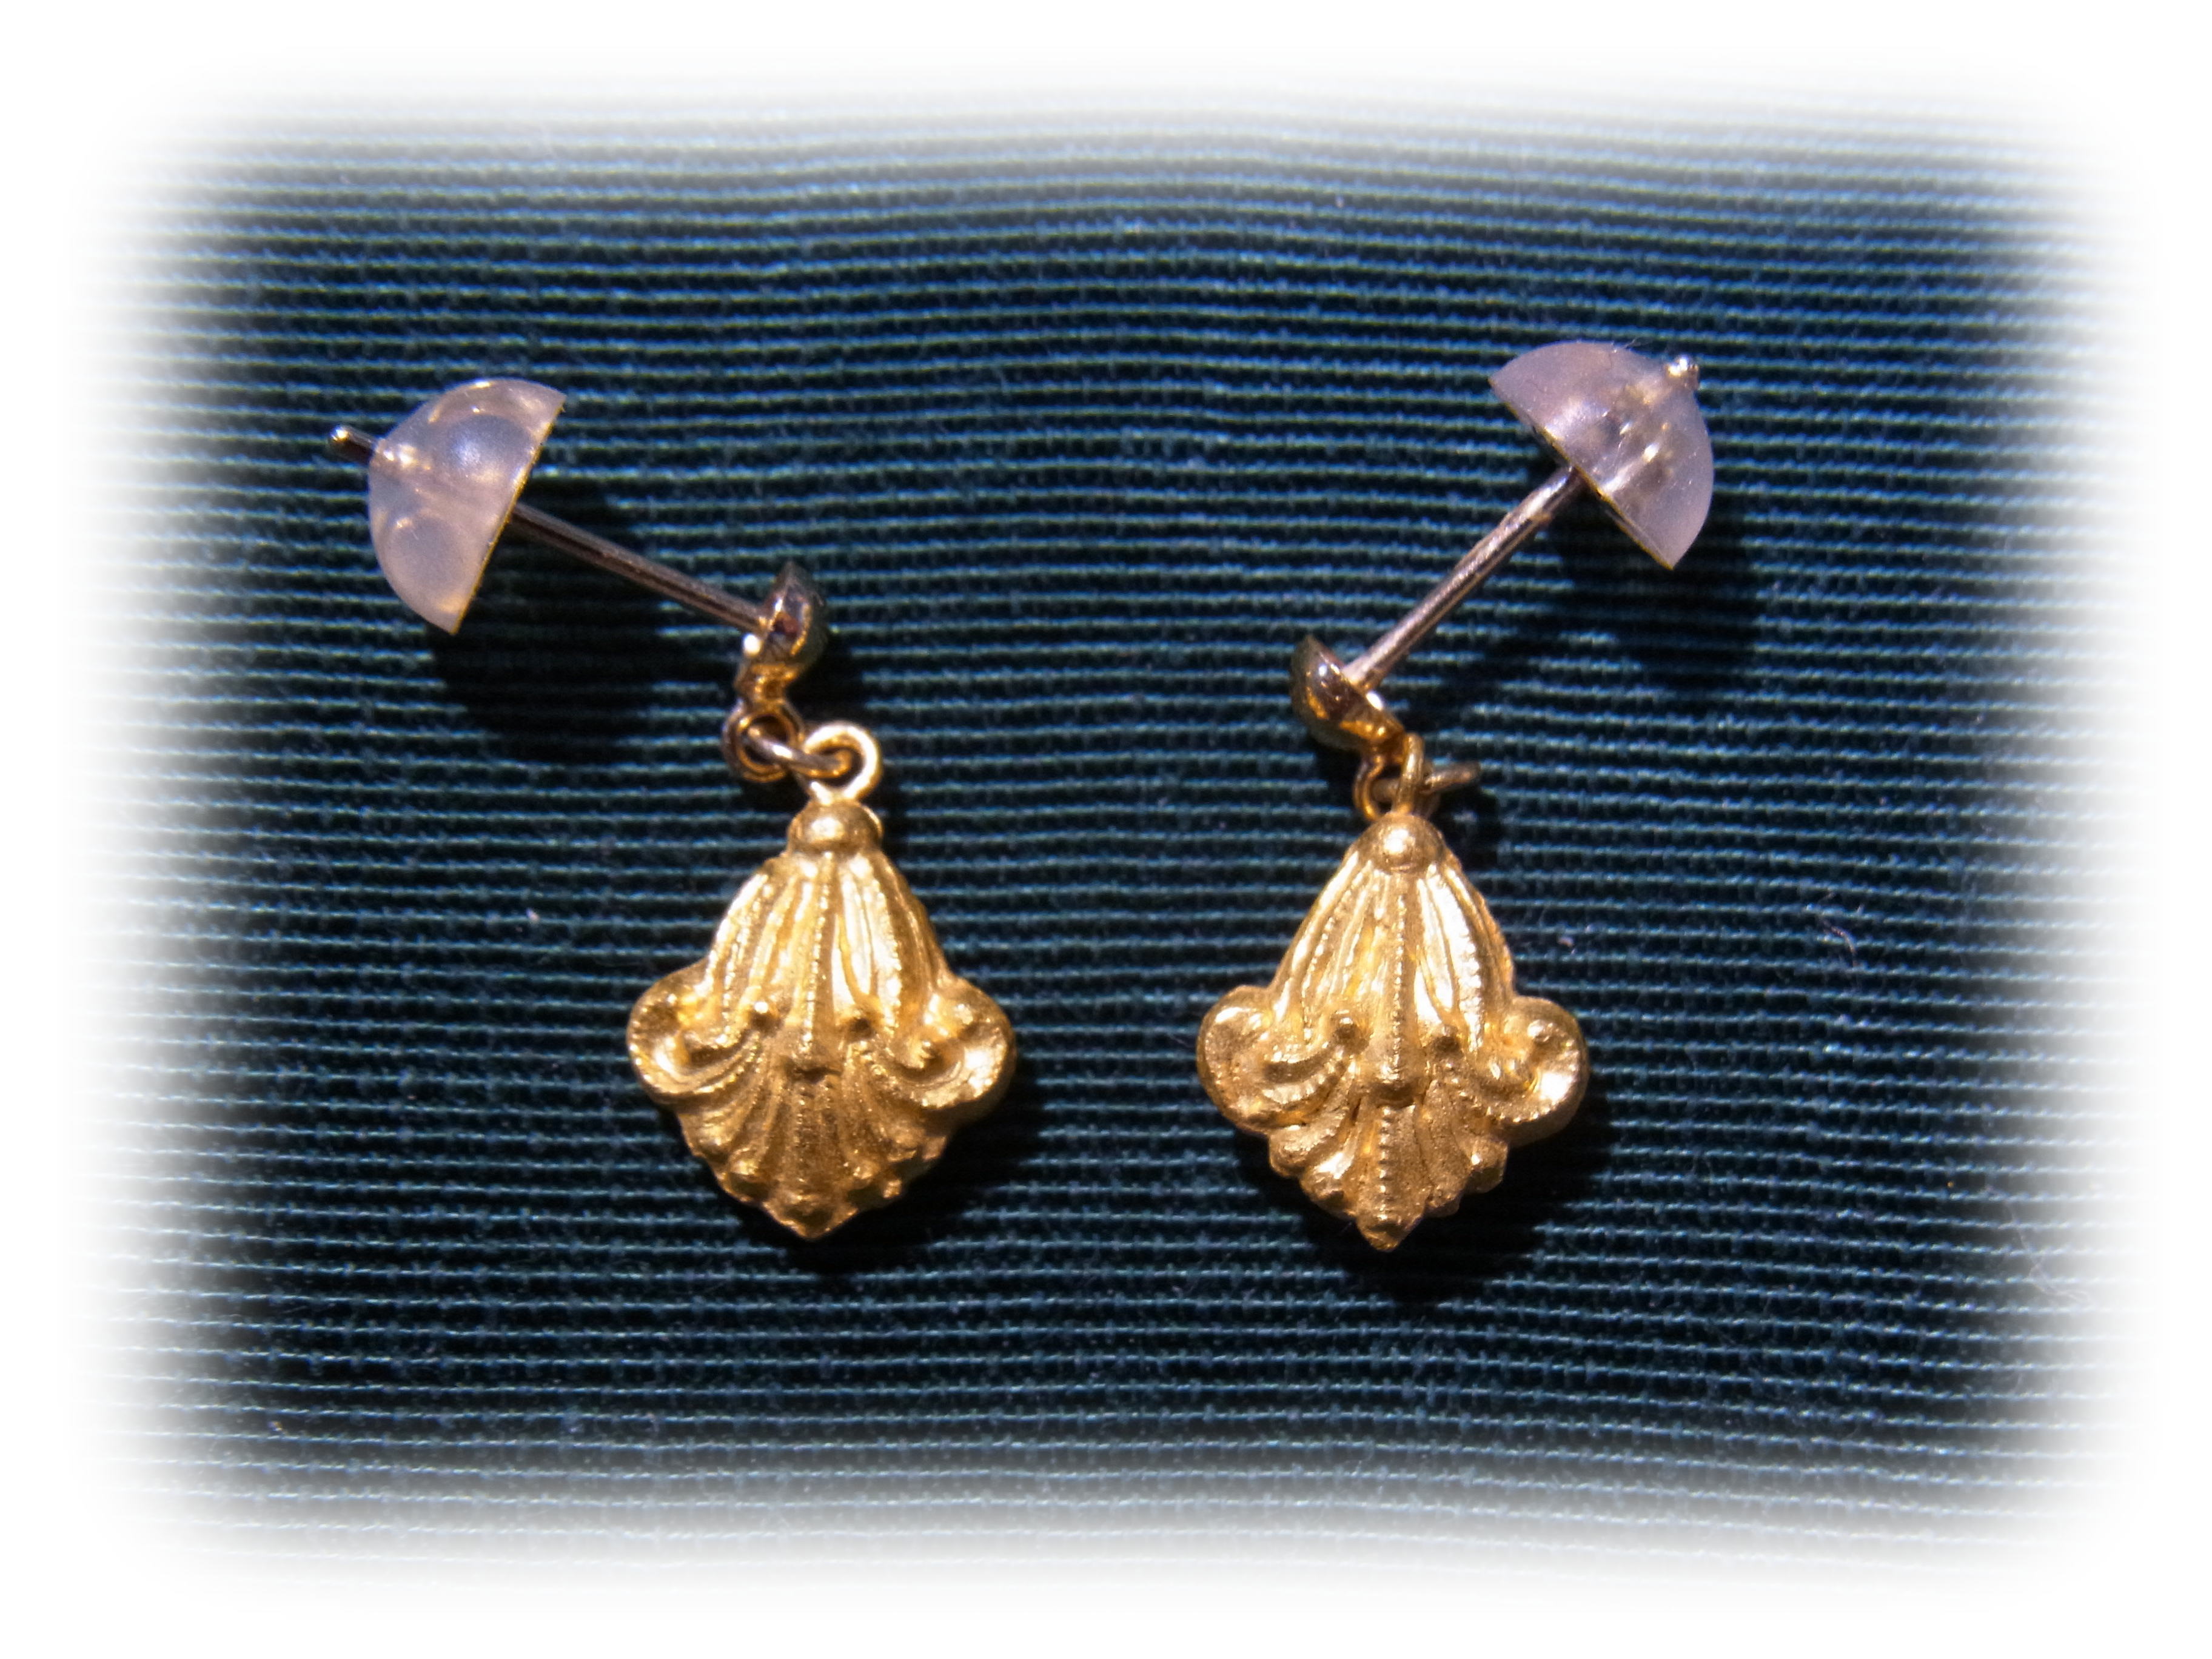 With gained gold parts, I made gold earrings.